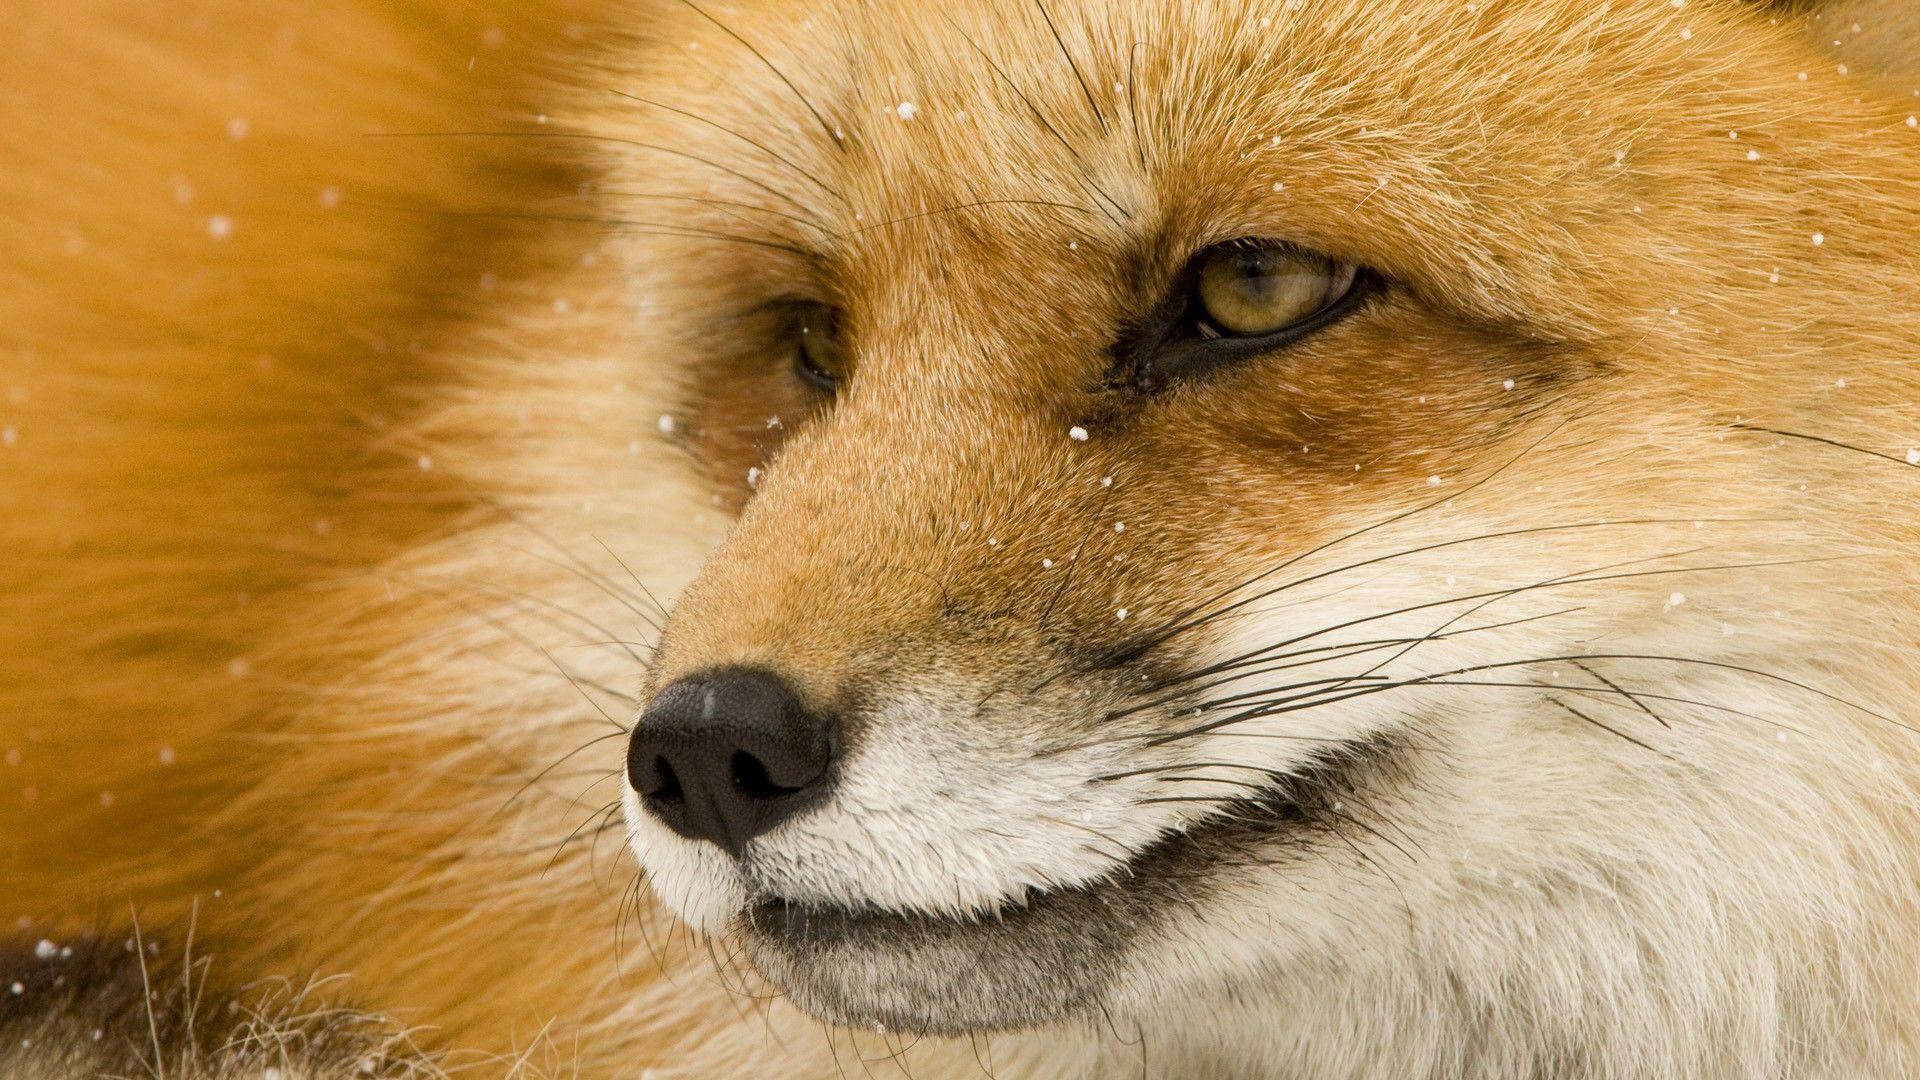 Wallpaper of Foxes